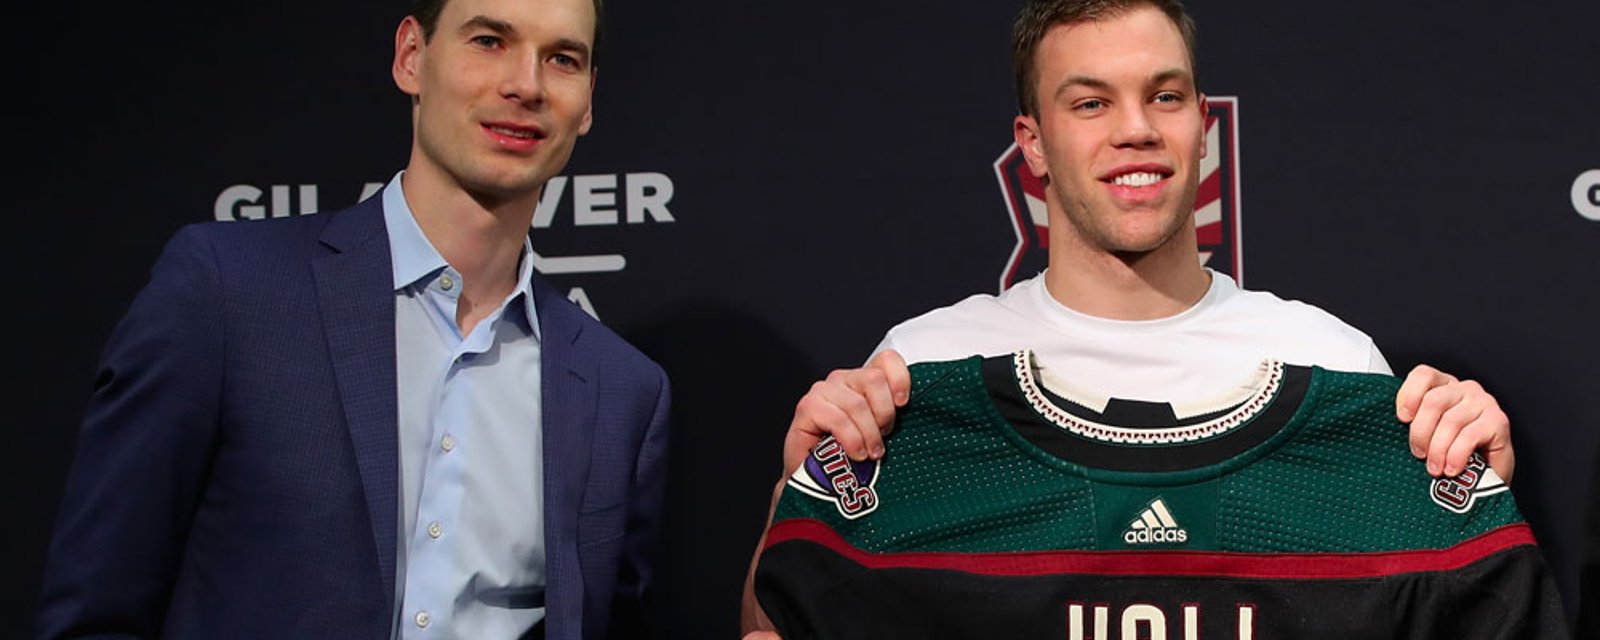 Disgraced former NHL GM John Chayka officially interviews for vacant GM position